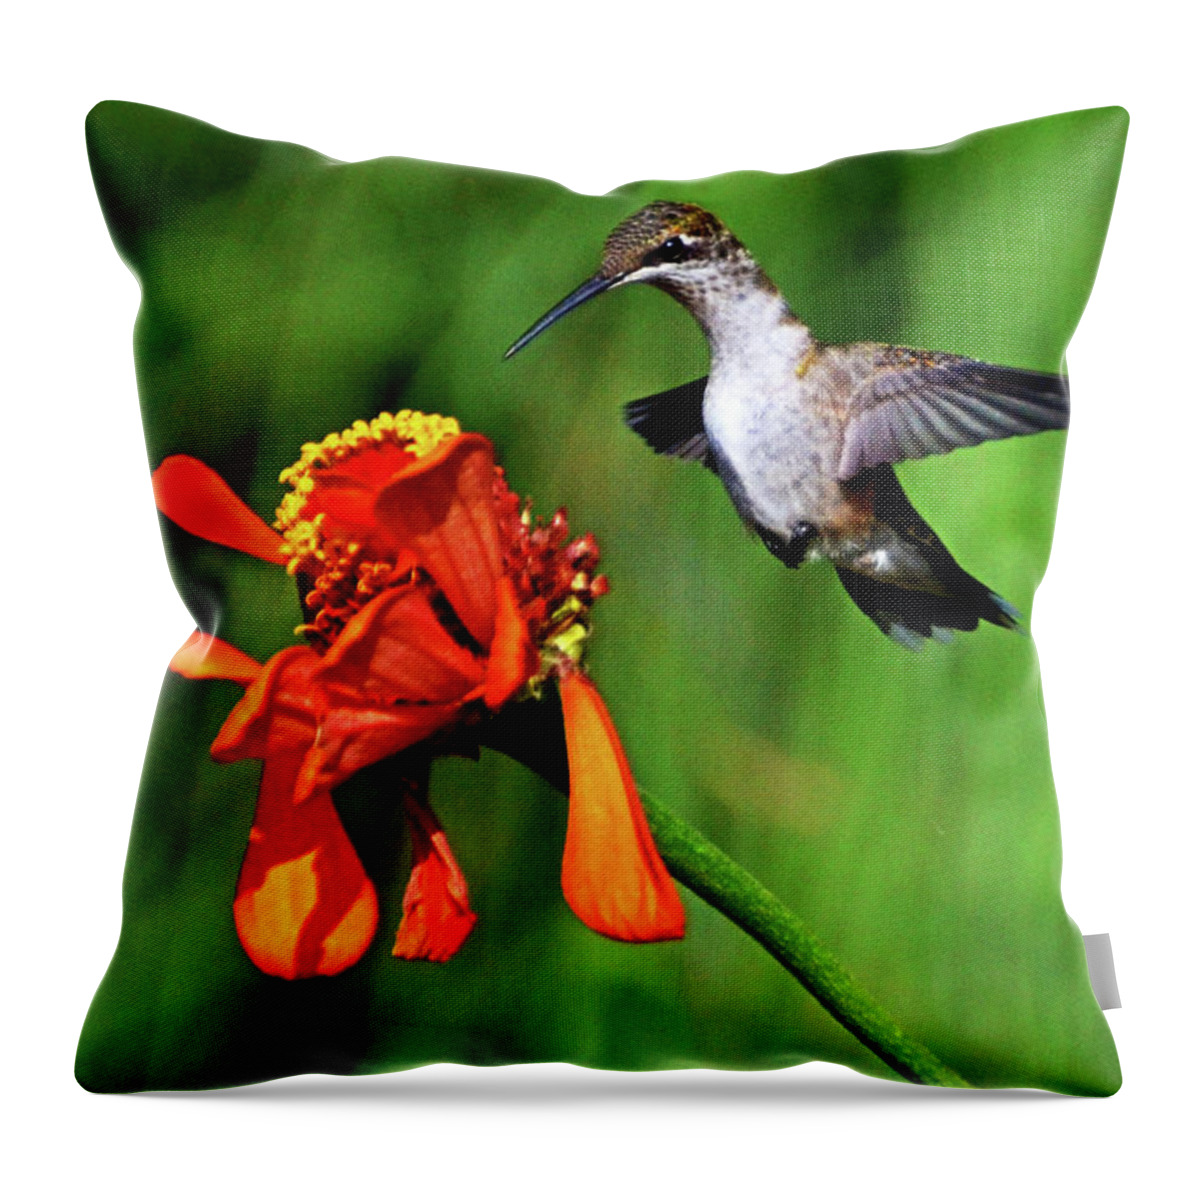 Bird Throw Pillow featuring the photograph Standing In Motion - Hummingbird In Flight 013 by George Bostian